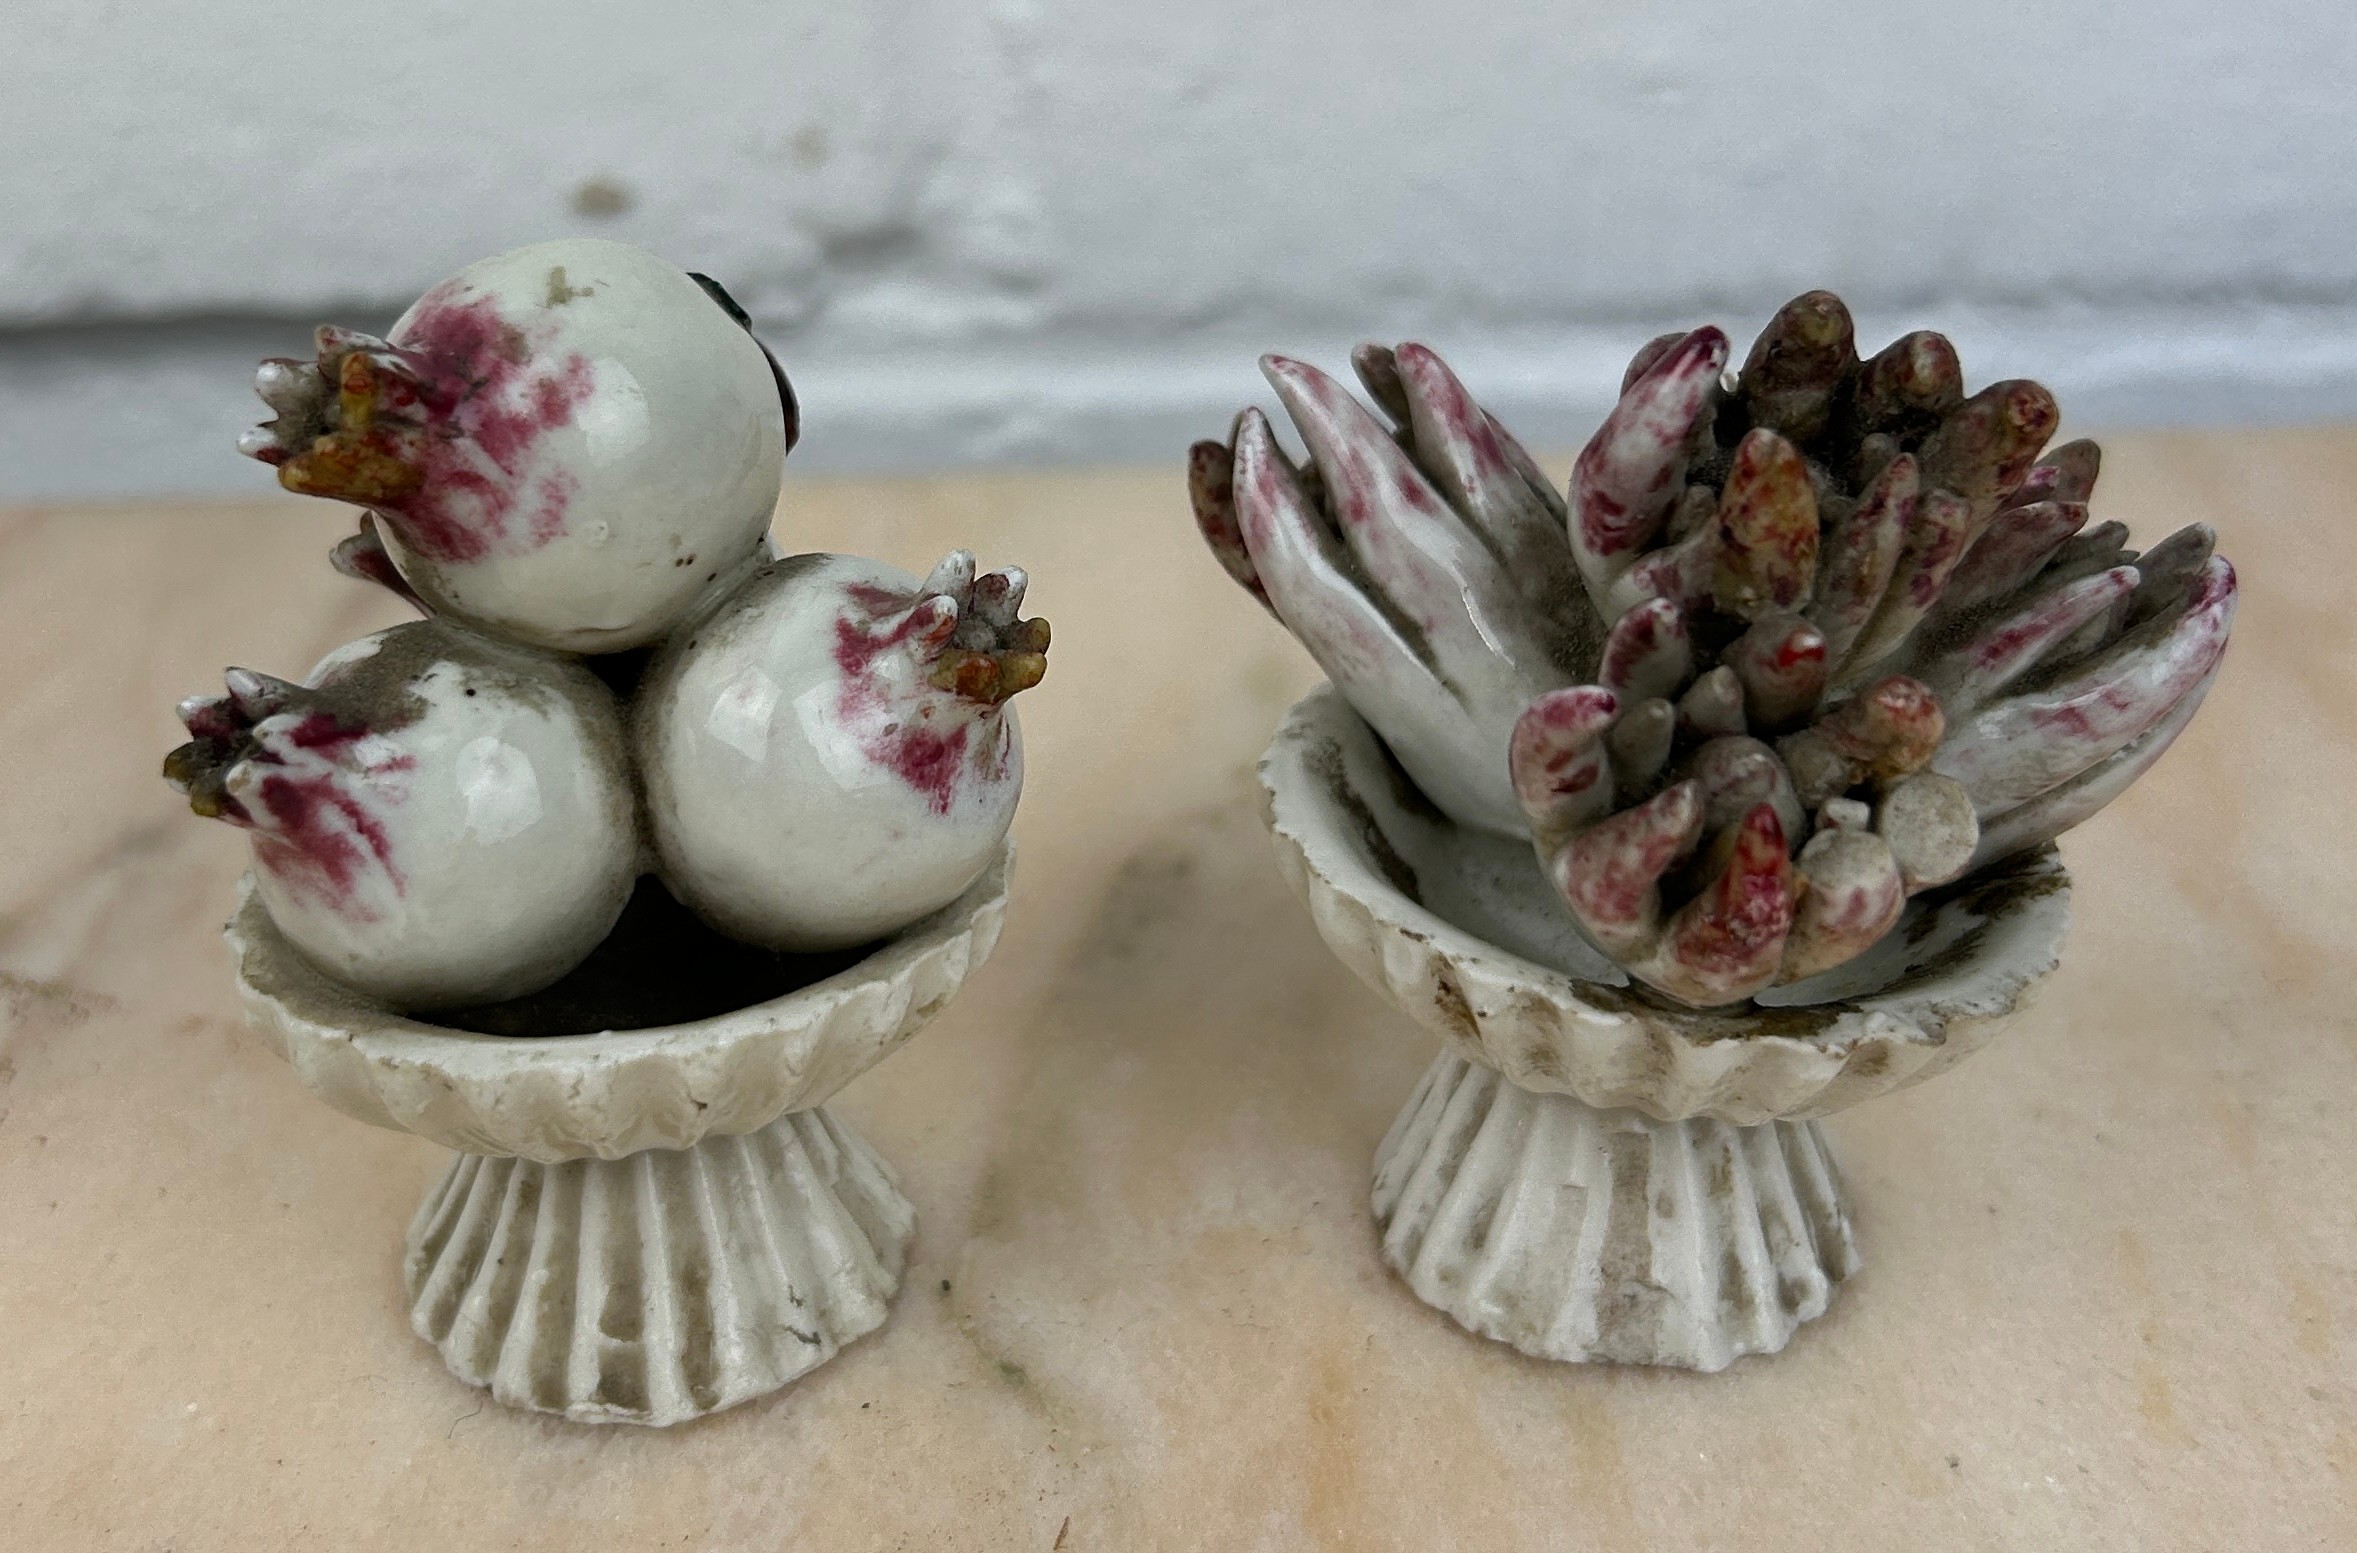 A PAIR OF BIONIC PORCELAIN MADE WITH TRADITIONAL CHINESE THEMES, Chayote, pomegranate, longevity